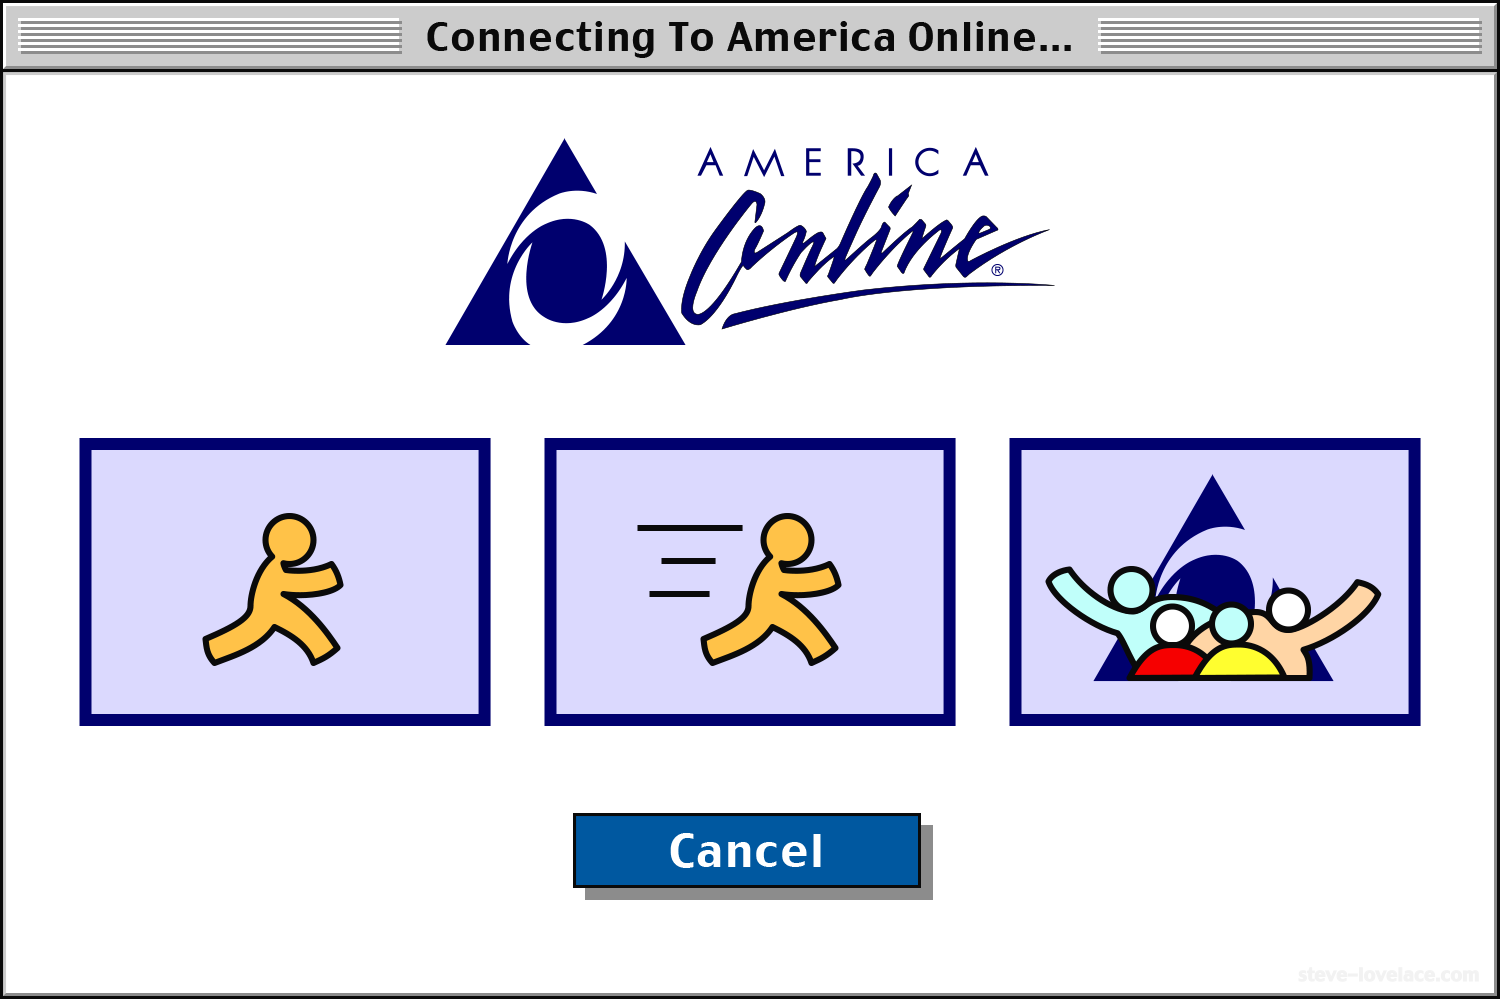 AOL and Other Online Services